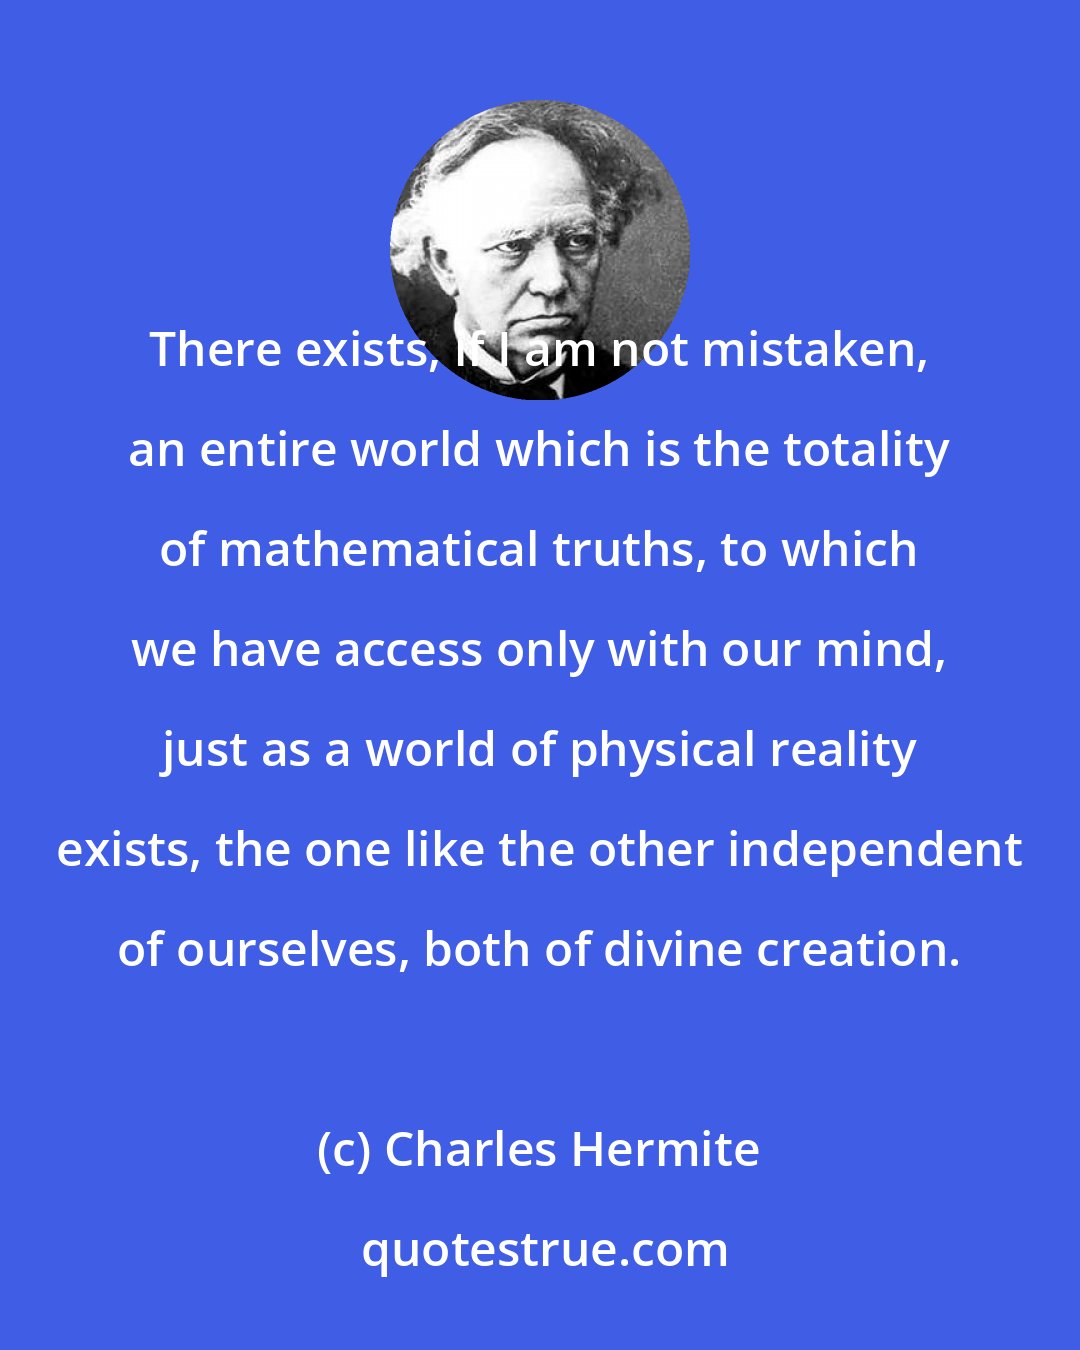 Charles Hermite: There exists, if I am not mistaken, an entire world which is the totality of mathematical truths, to which we have access only with our mind, just as a world of physical reality exists, the one like the other independent of ourselves, both of divine creation.